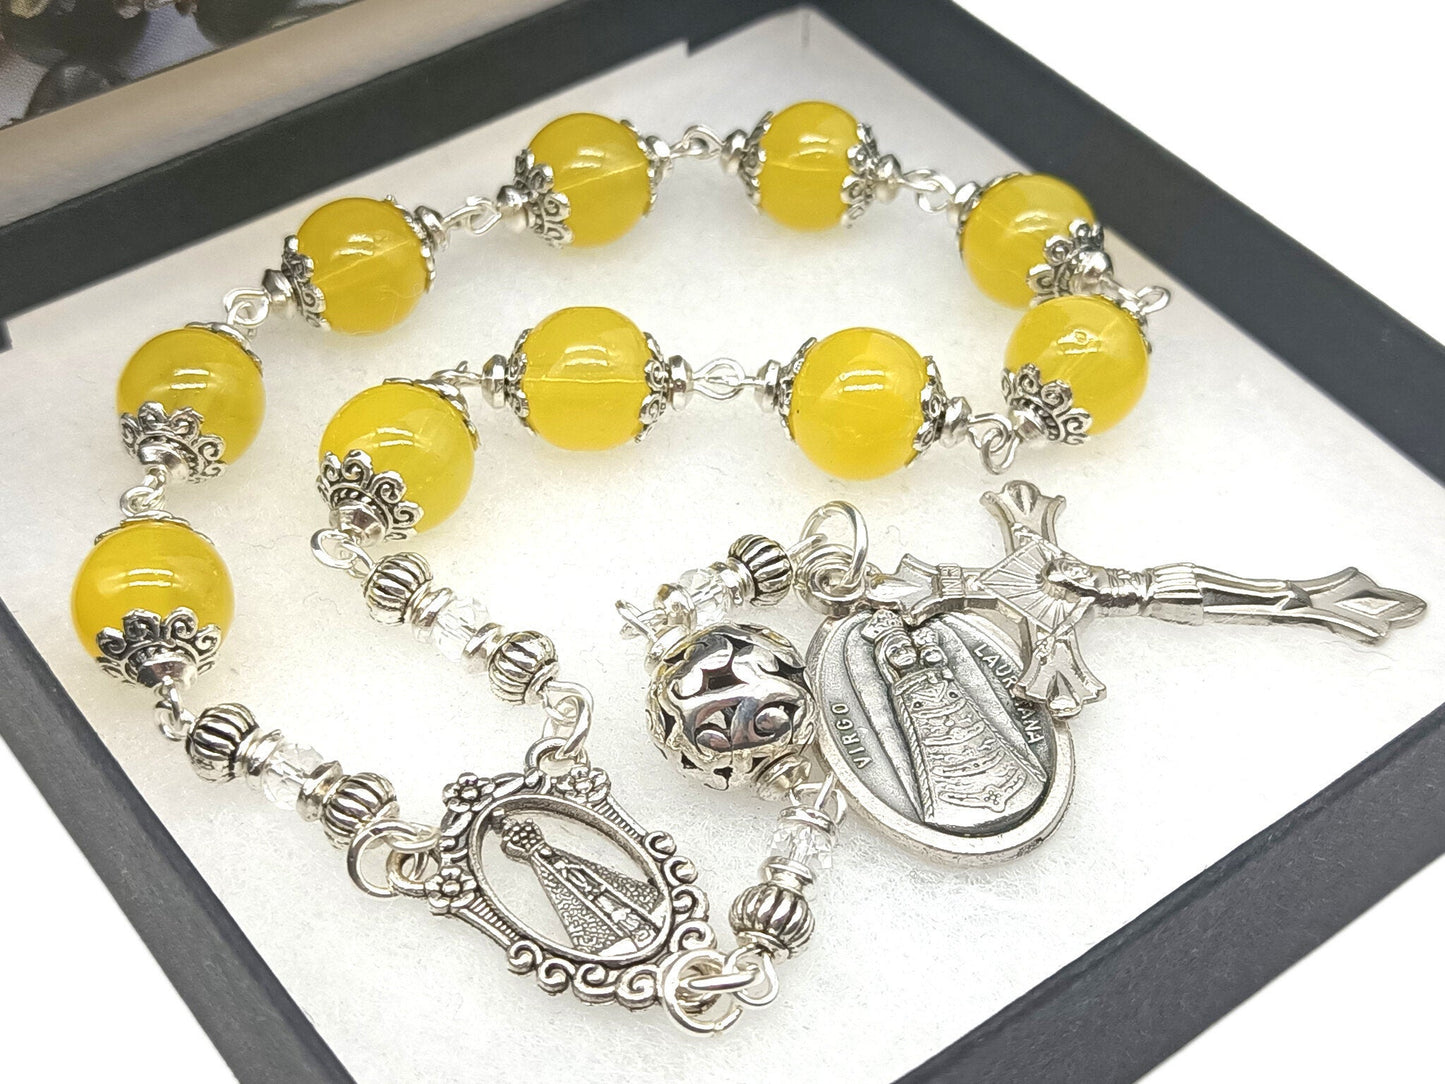 Our lady of Loretto unique rosary beads single decade with yellow glass beads, silver crucifix, pater bead and Virgo Lauretana centre medal.